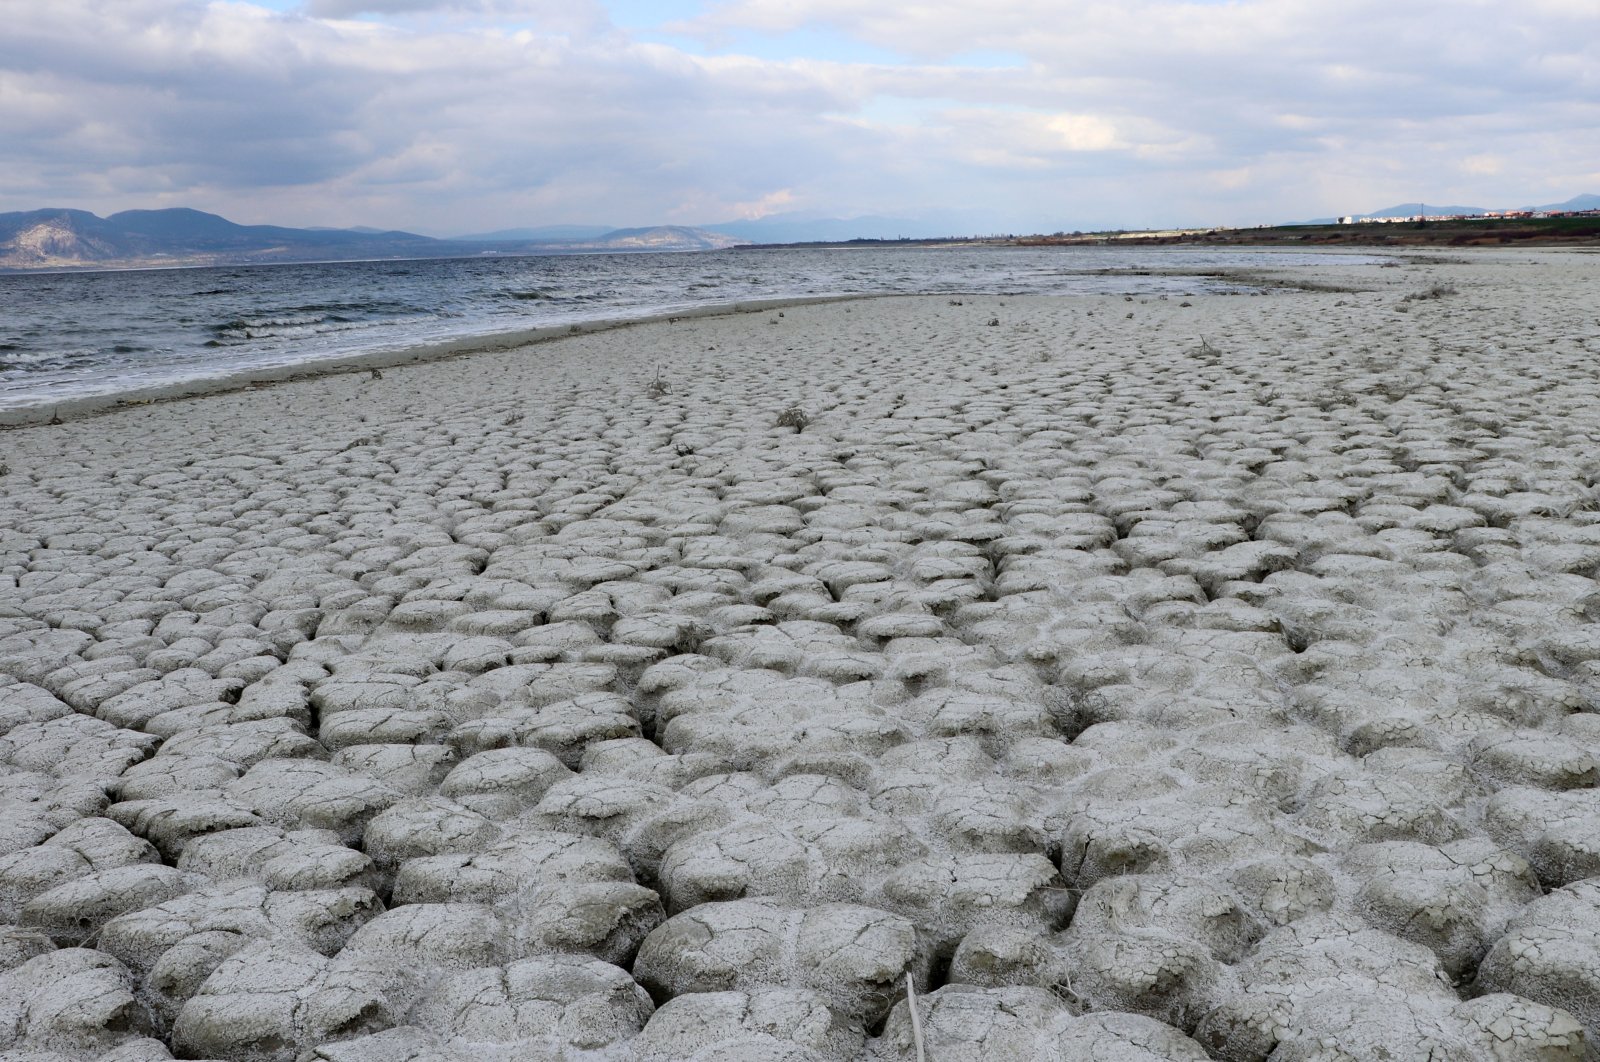 Food insecurity, water shortage Turkey's top climate change risks | Daily Sabah - Daily Sabah